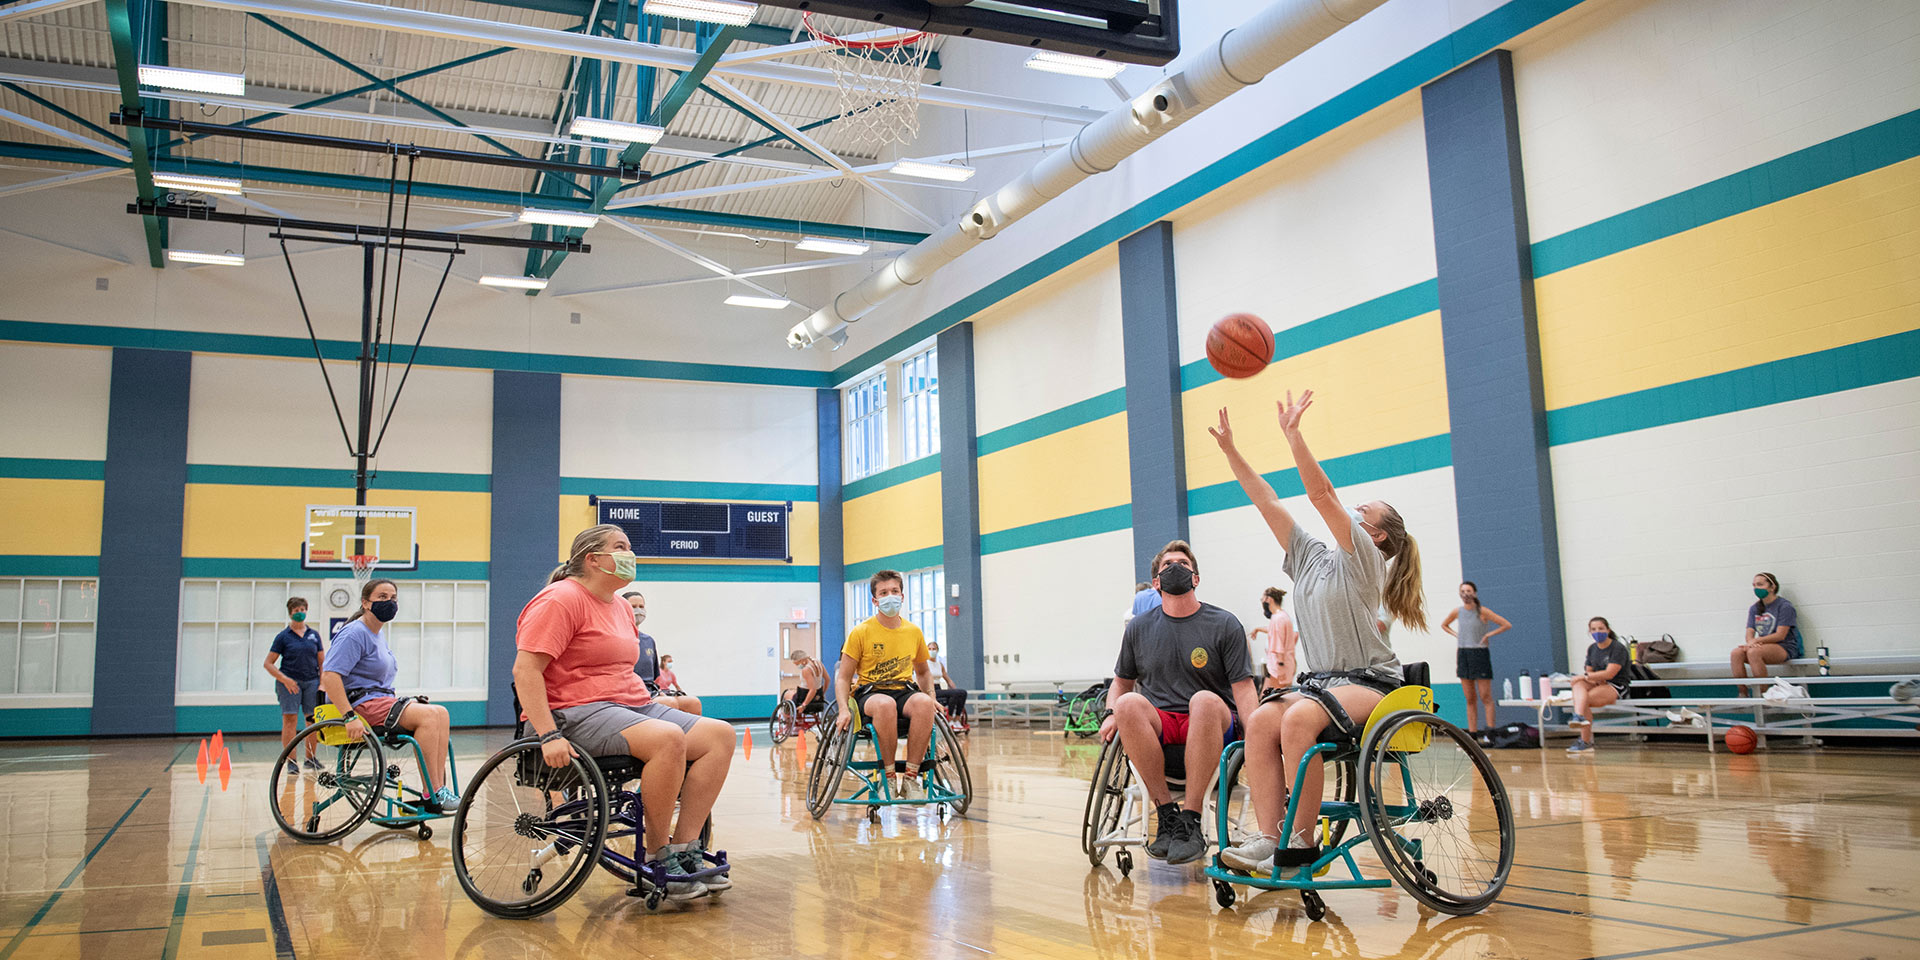 A game of wheelchair basketball being played